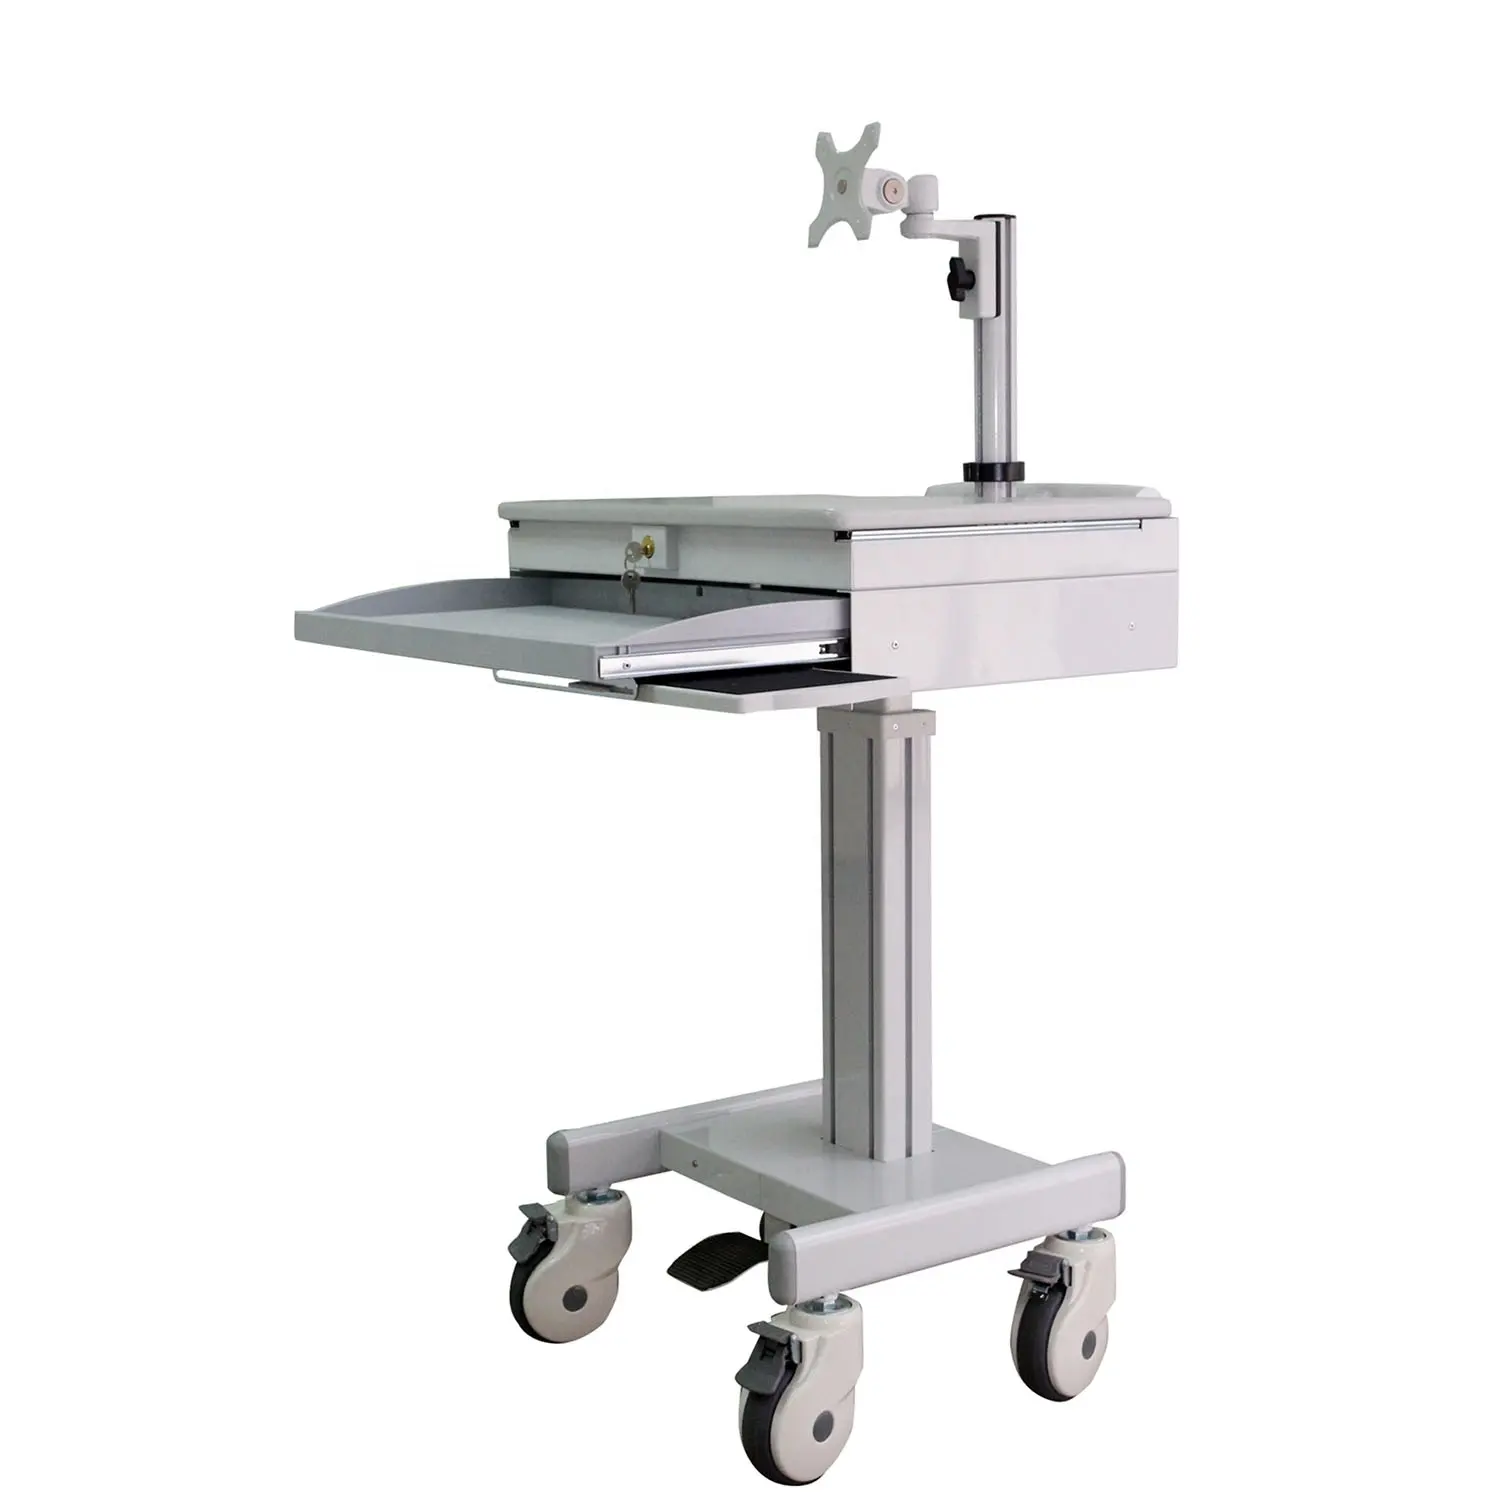 Hospital Monitor Trolley Medical Computing Cart Workstation with LCD Arm Support One Monitor and Lockable Laptop storage space